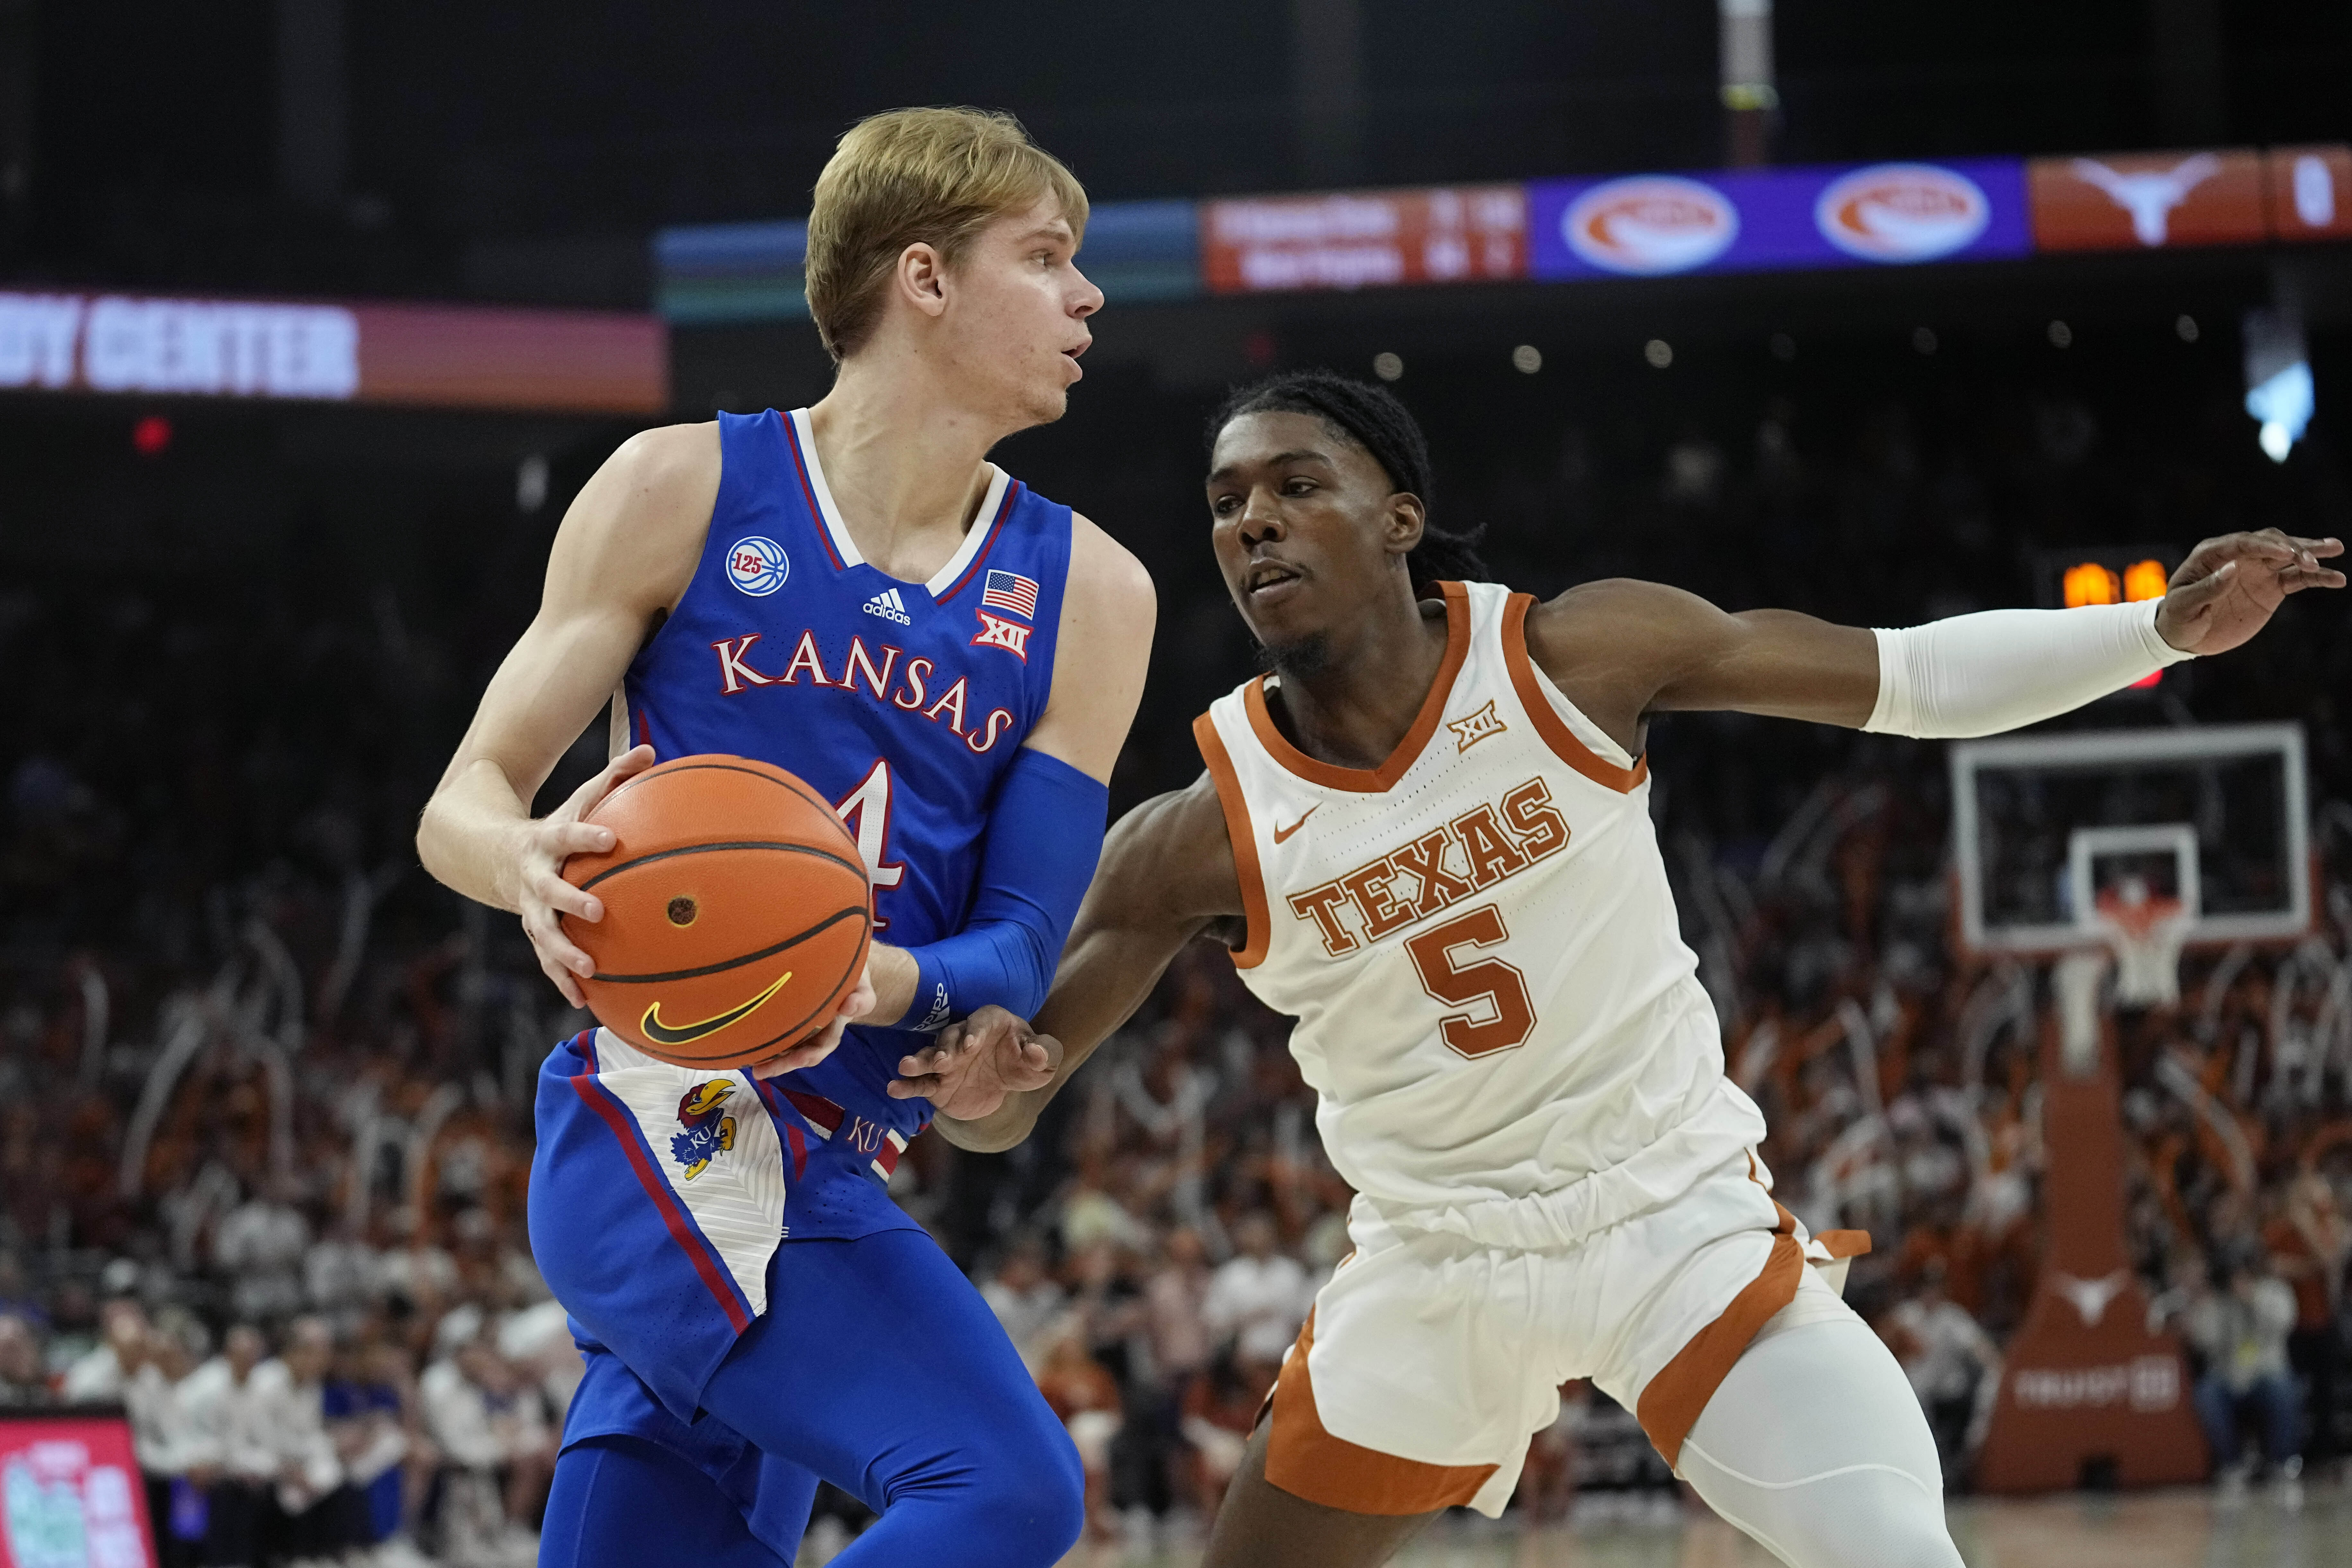 How to watch the Big 12 mens basketball tournament